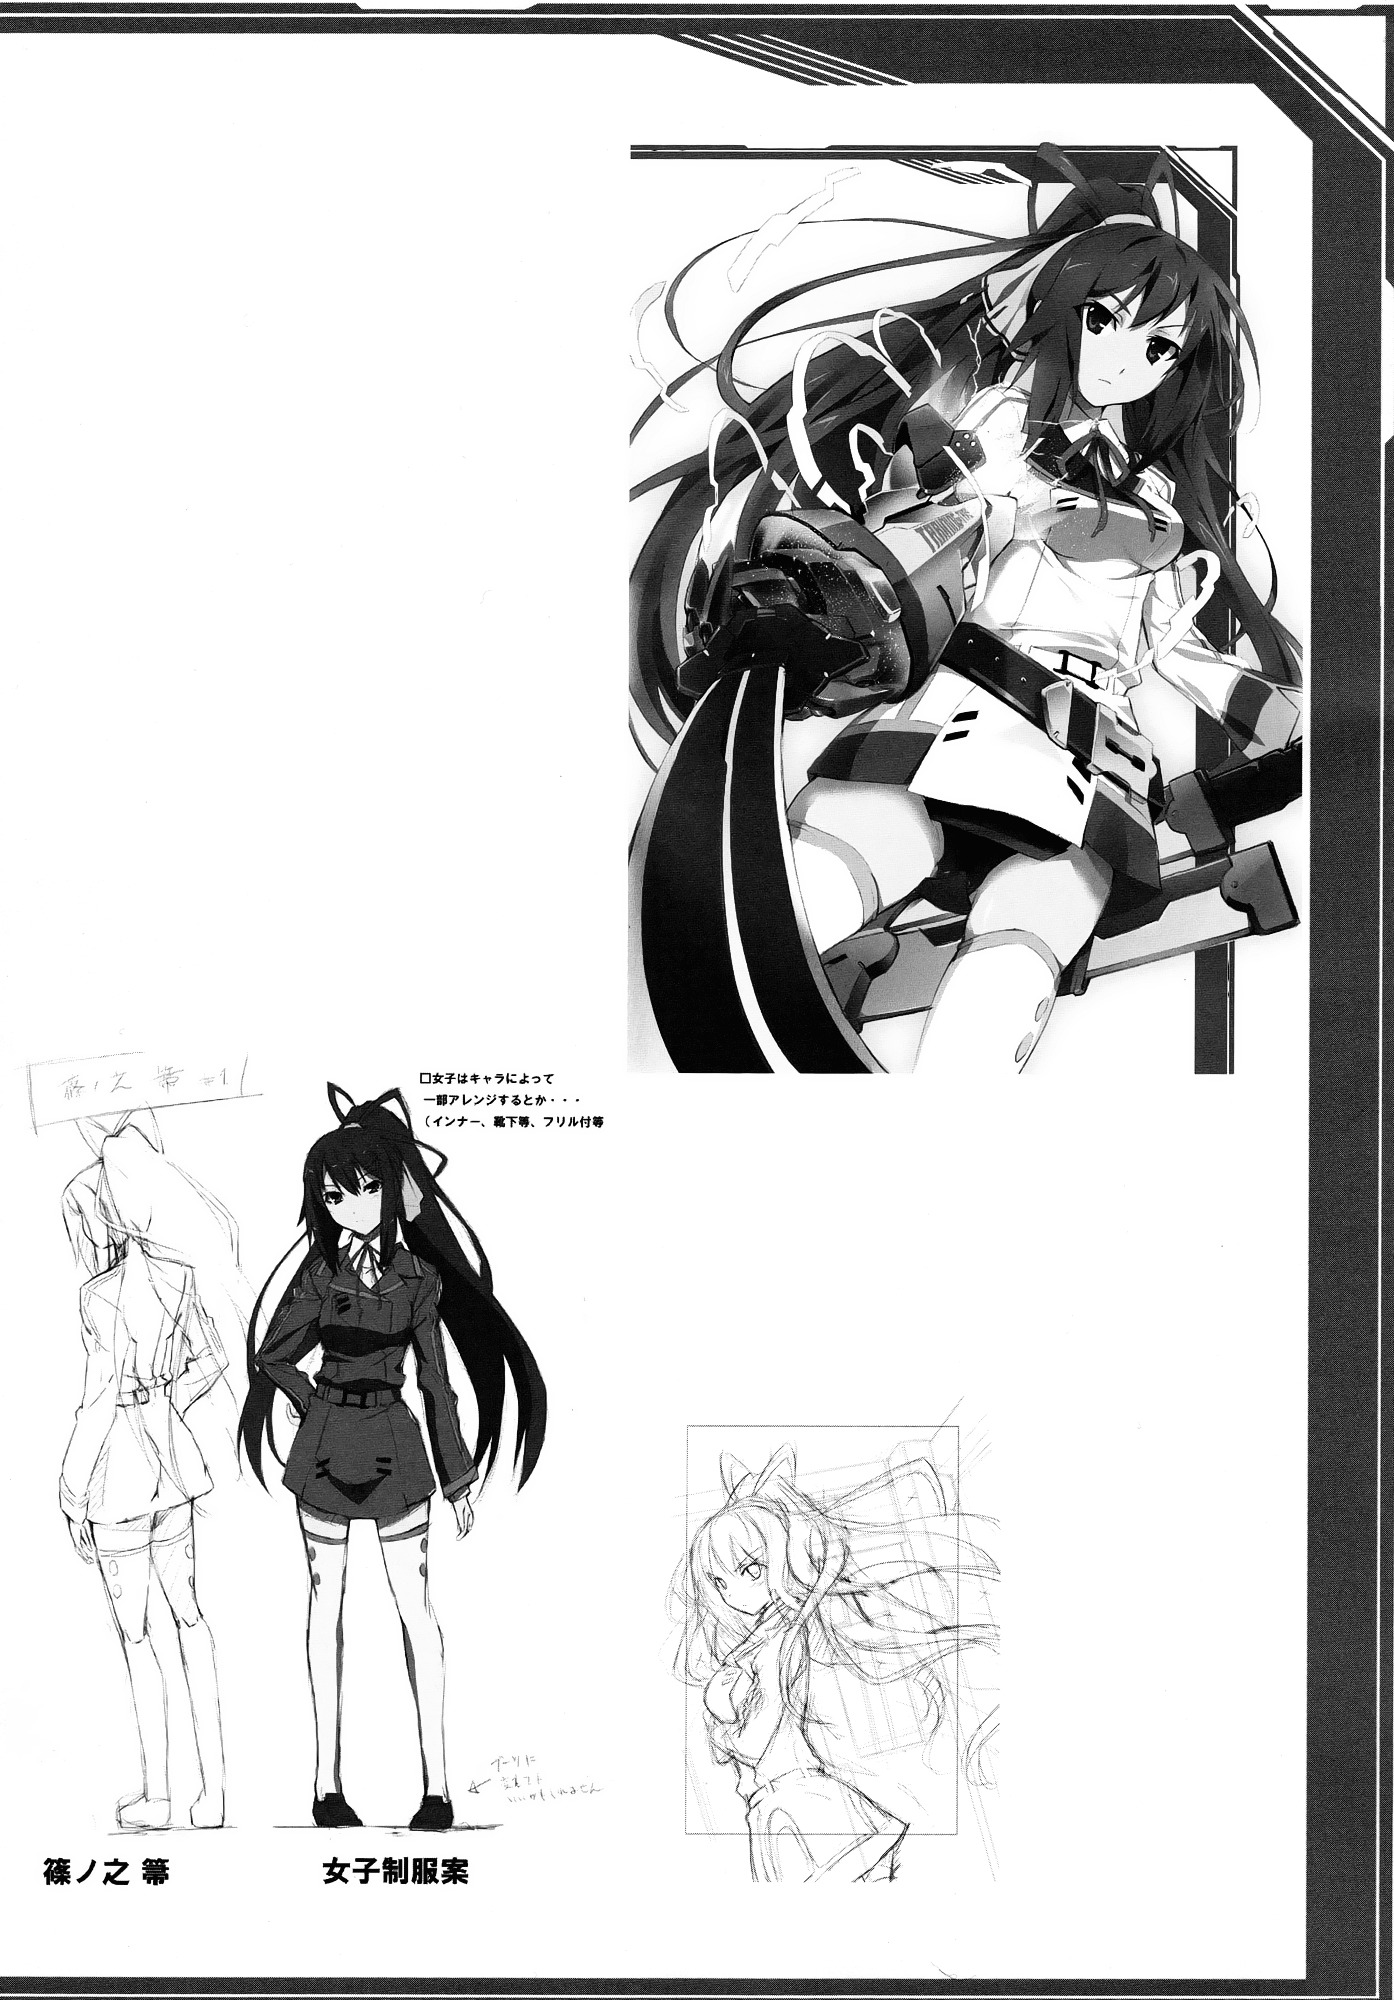 Infinite Stratos - Infinite Stratos Book Direct From The Warehouse (Artbook) Vol.1 Chapter 0 : Infinite Stratos Book Direct From The Warehouse [Complete] - Picture 3